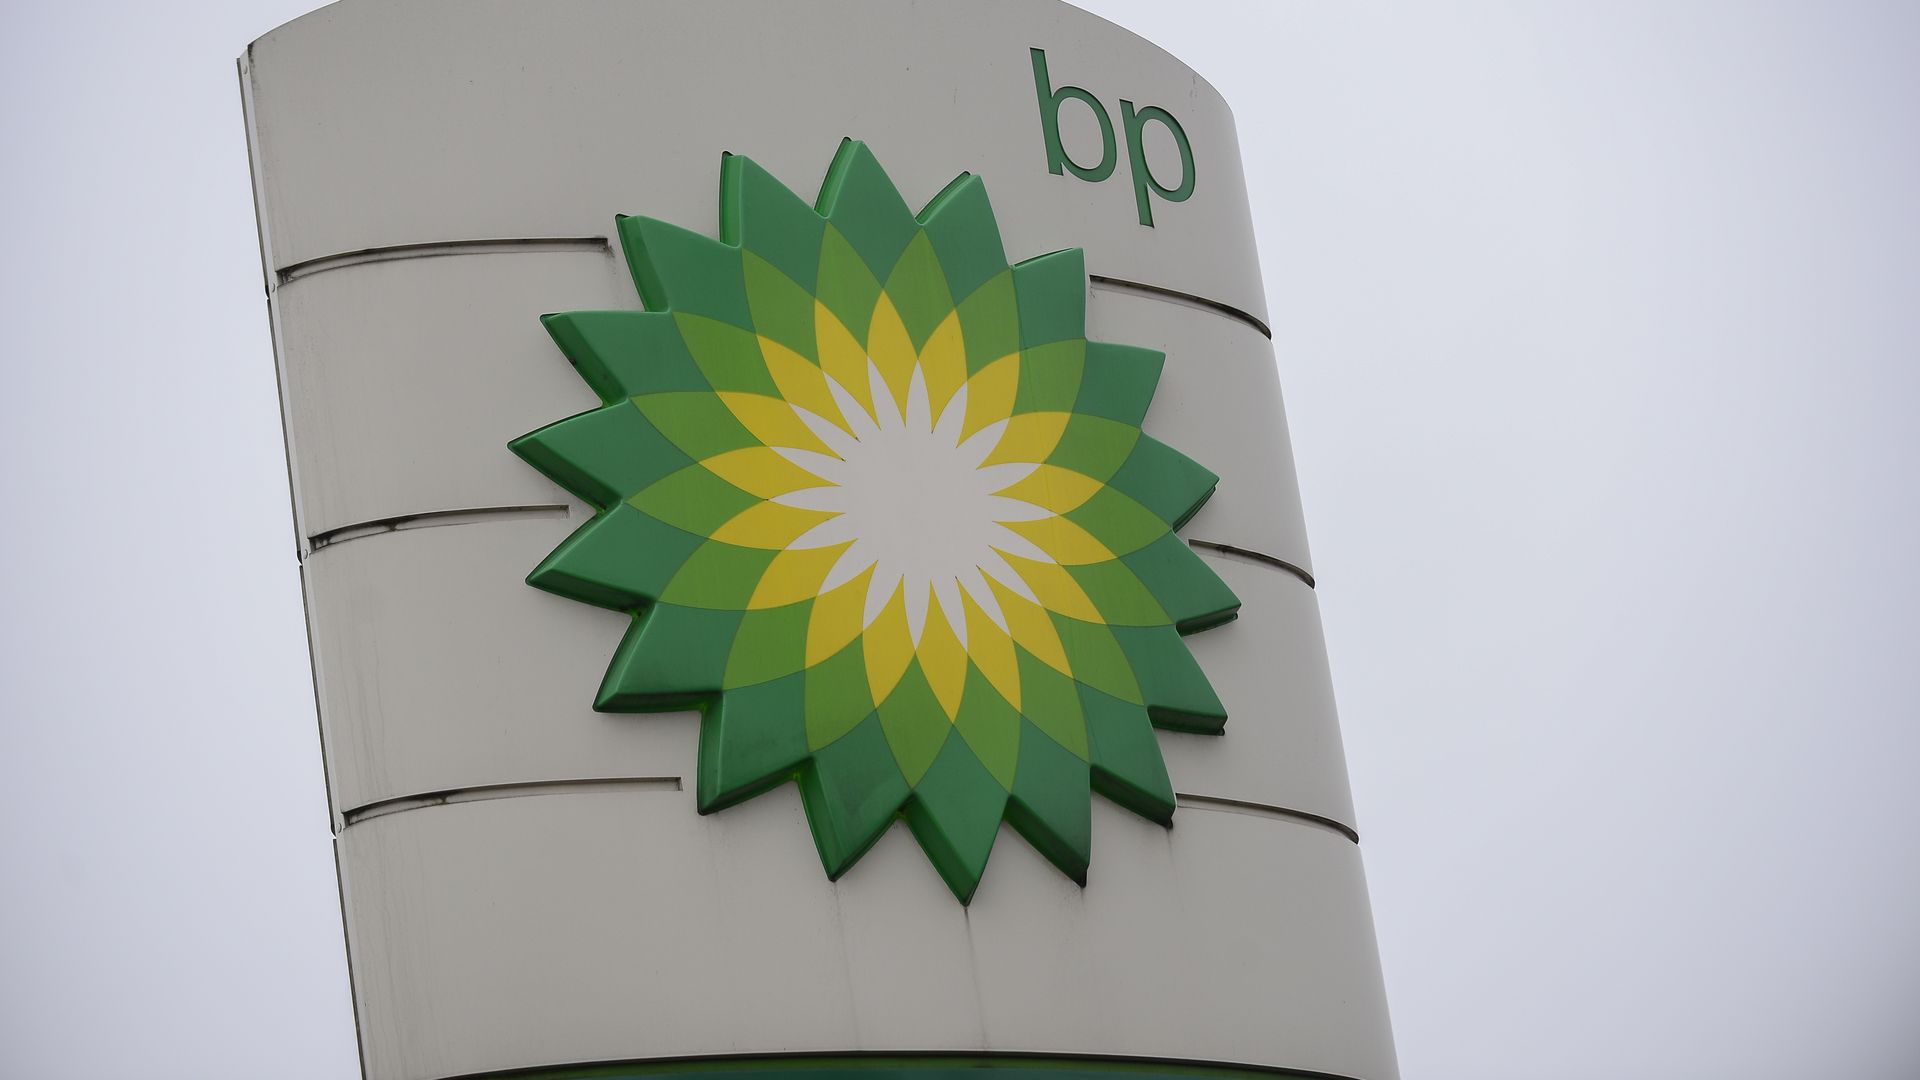 BP green and yellow logo sign for a gas station